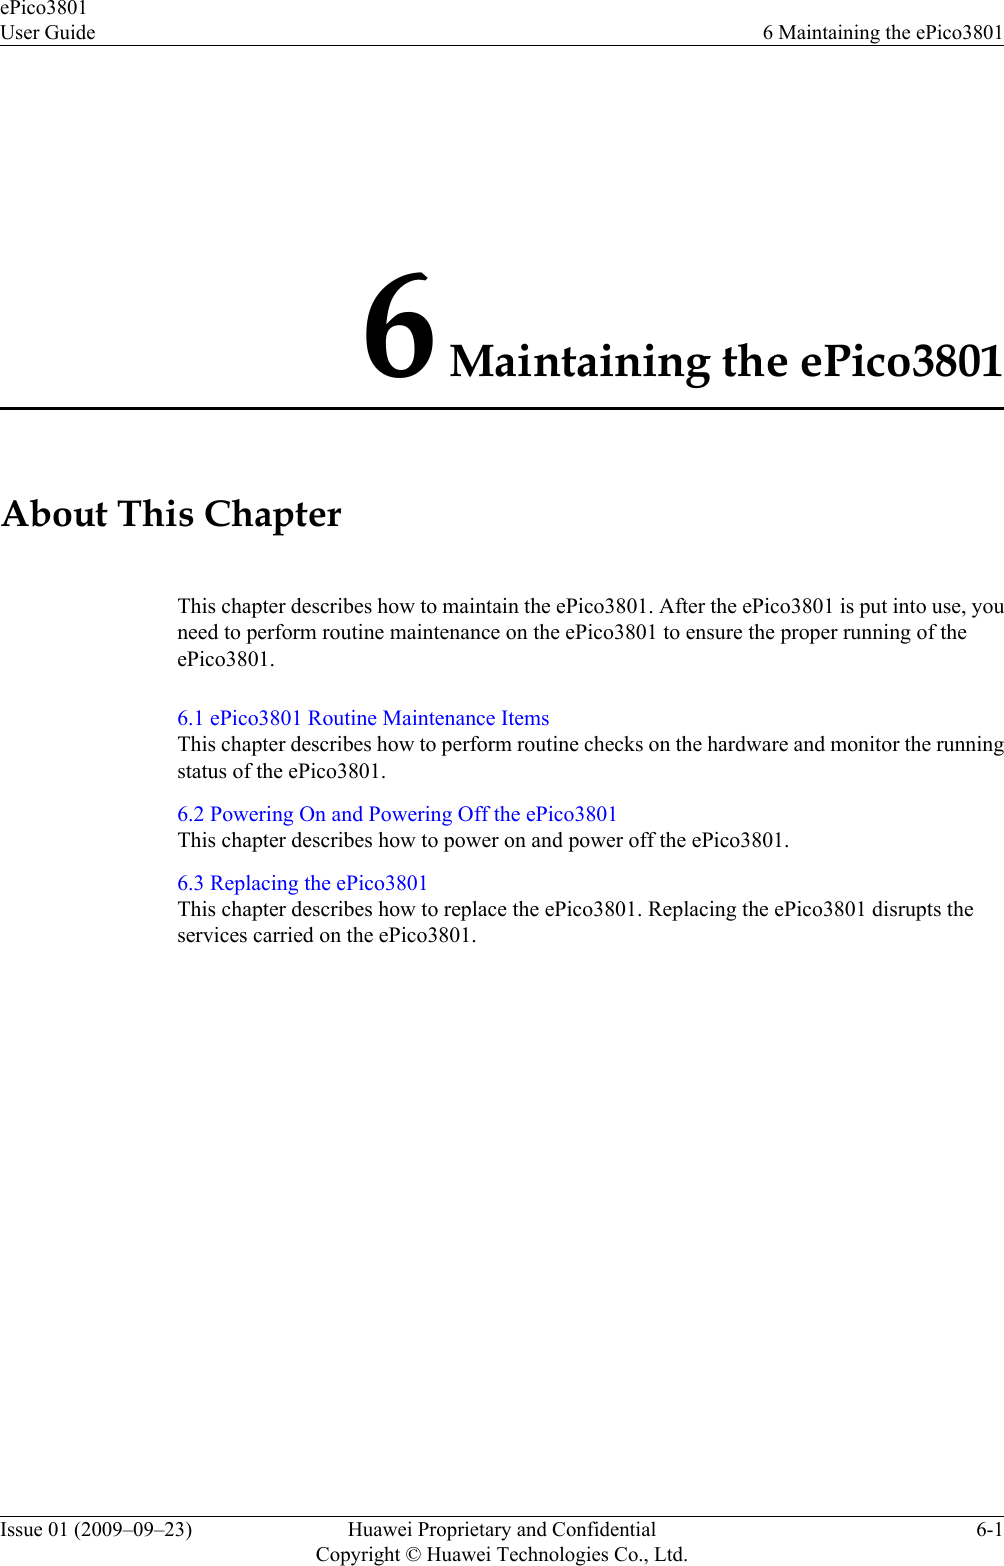 6 Maintaining the ePico3801About This ChapterThis chapter describes how to maintain the ePico3801. After the ePico3801 is put into use, youneed to perform routine maintenance on the ePico3801 to ensure the proper running of theePico3801.6.1 ePico3801 Routine Maintenance ItemsThis chapter describes how to perform routine checks on the hardware and monitor the runningstatus of the ePico3801.6.2 Powering On and Powering Off the ePico3801This chapter describes how to power on and power off the ePico3801.6.3 Replacing the ePico3801This chapter describes how to replace the ePico3801. Replacing the ePico3801 disrupts theservices carried on the ePico3801.ePico3801User Guide 6 Maintaining the ePico3801Issue 01 (2009–09–23) Huawei Proprietary and ConfidentialCopyright © Huawei Technologies Co., Ltd.6-1